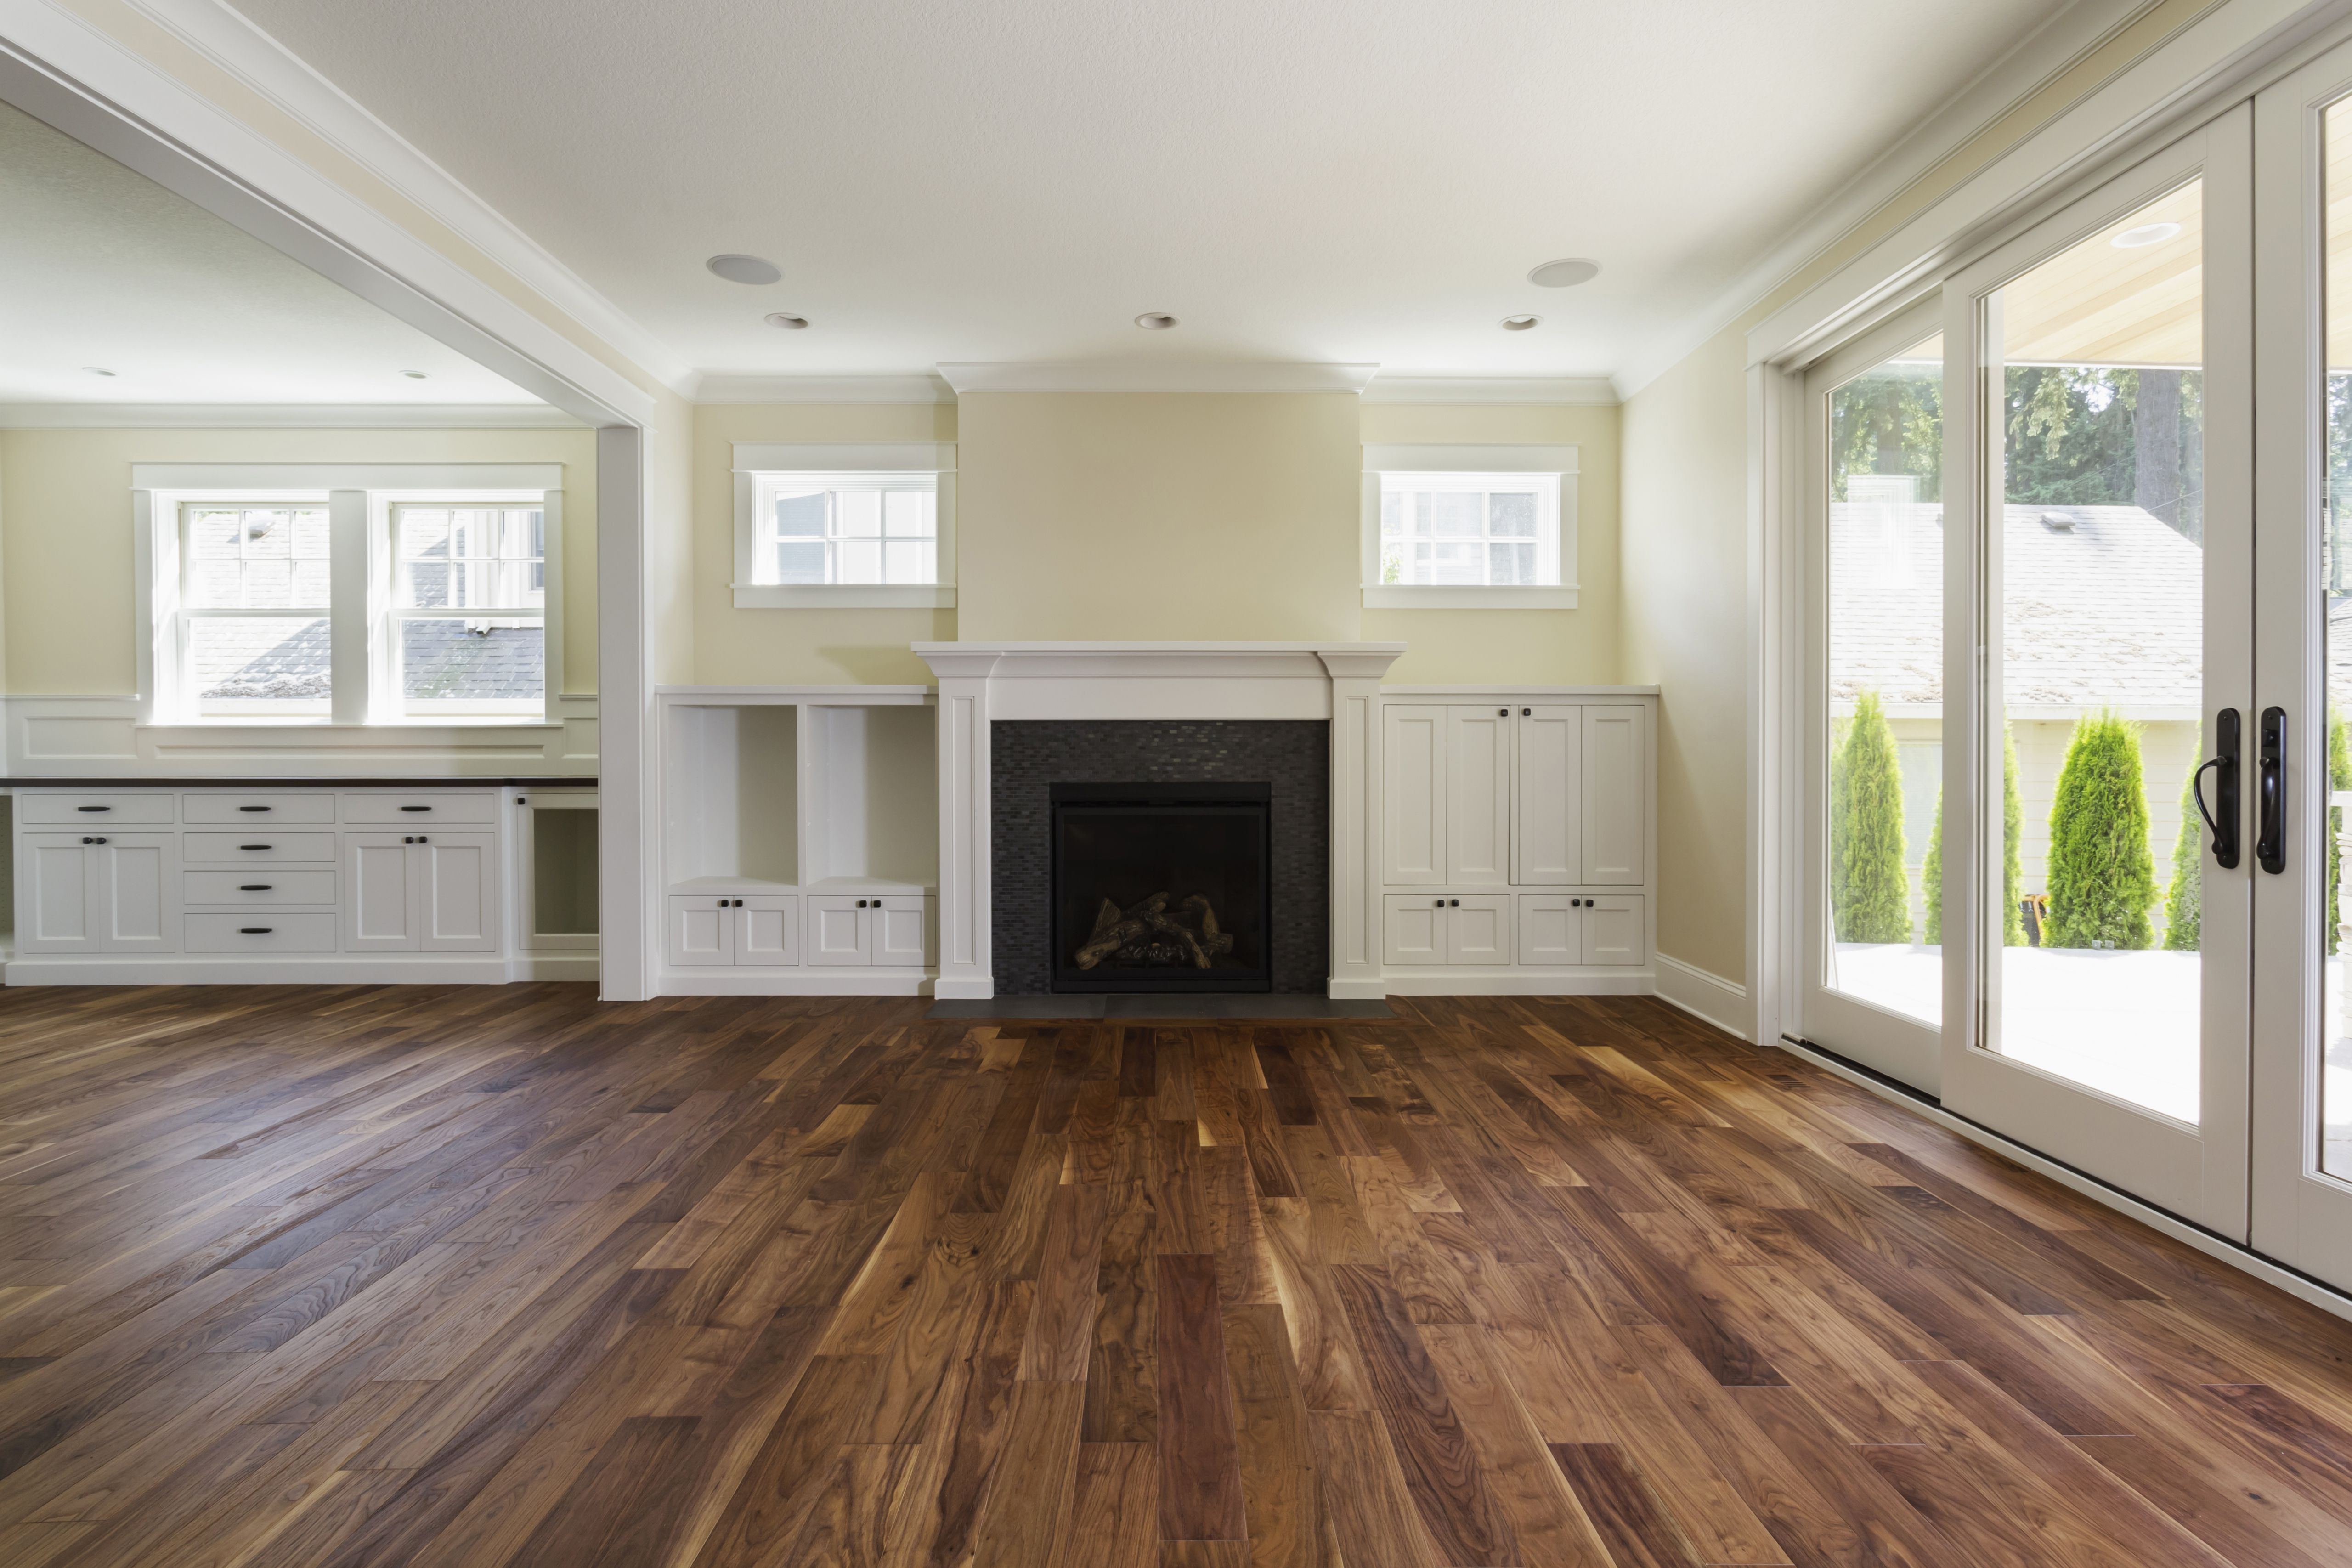 hardwood flooring for sale in canada of the pros and cons of prefinished hardwood flooring regarding fireplace and built in shelves in living room 482143011 57bef8e33df78cc16e035397